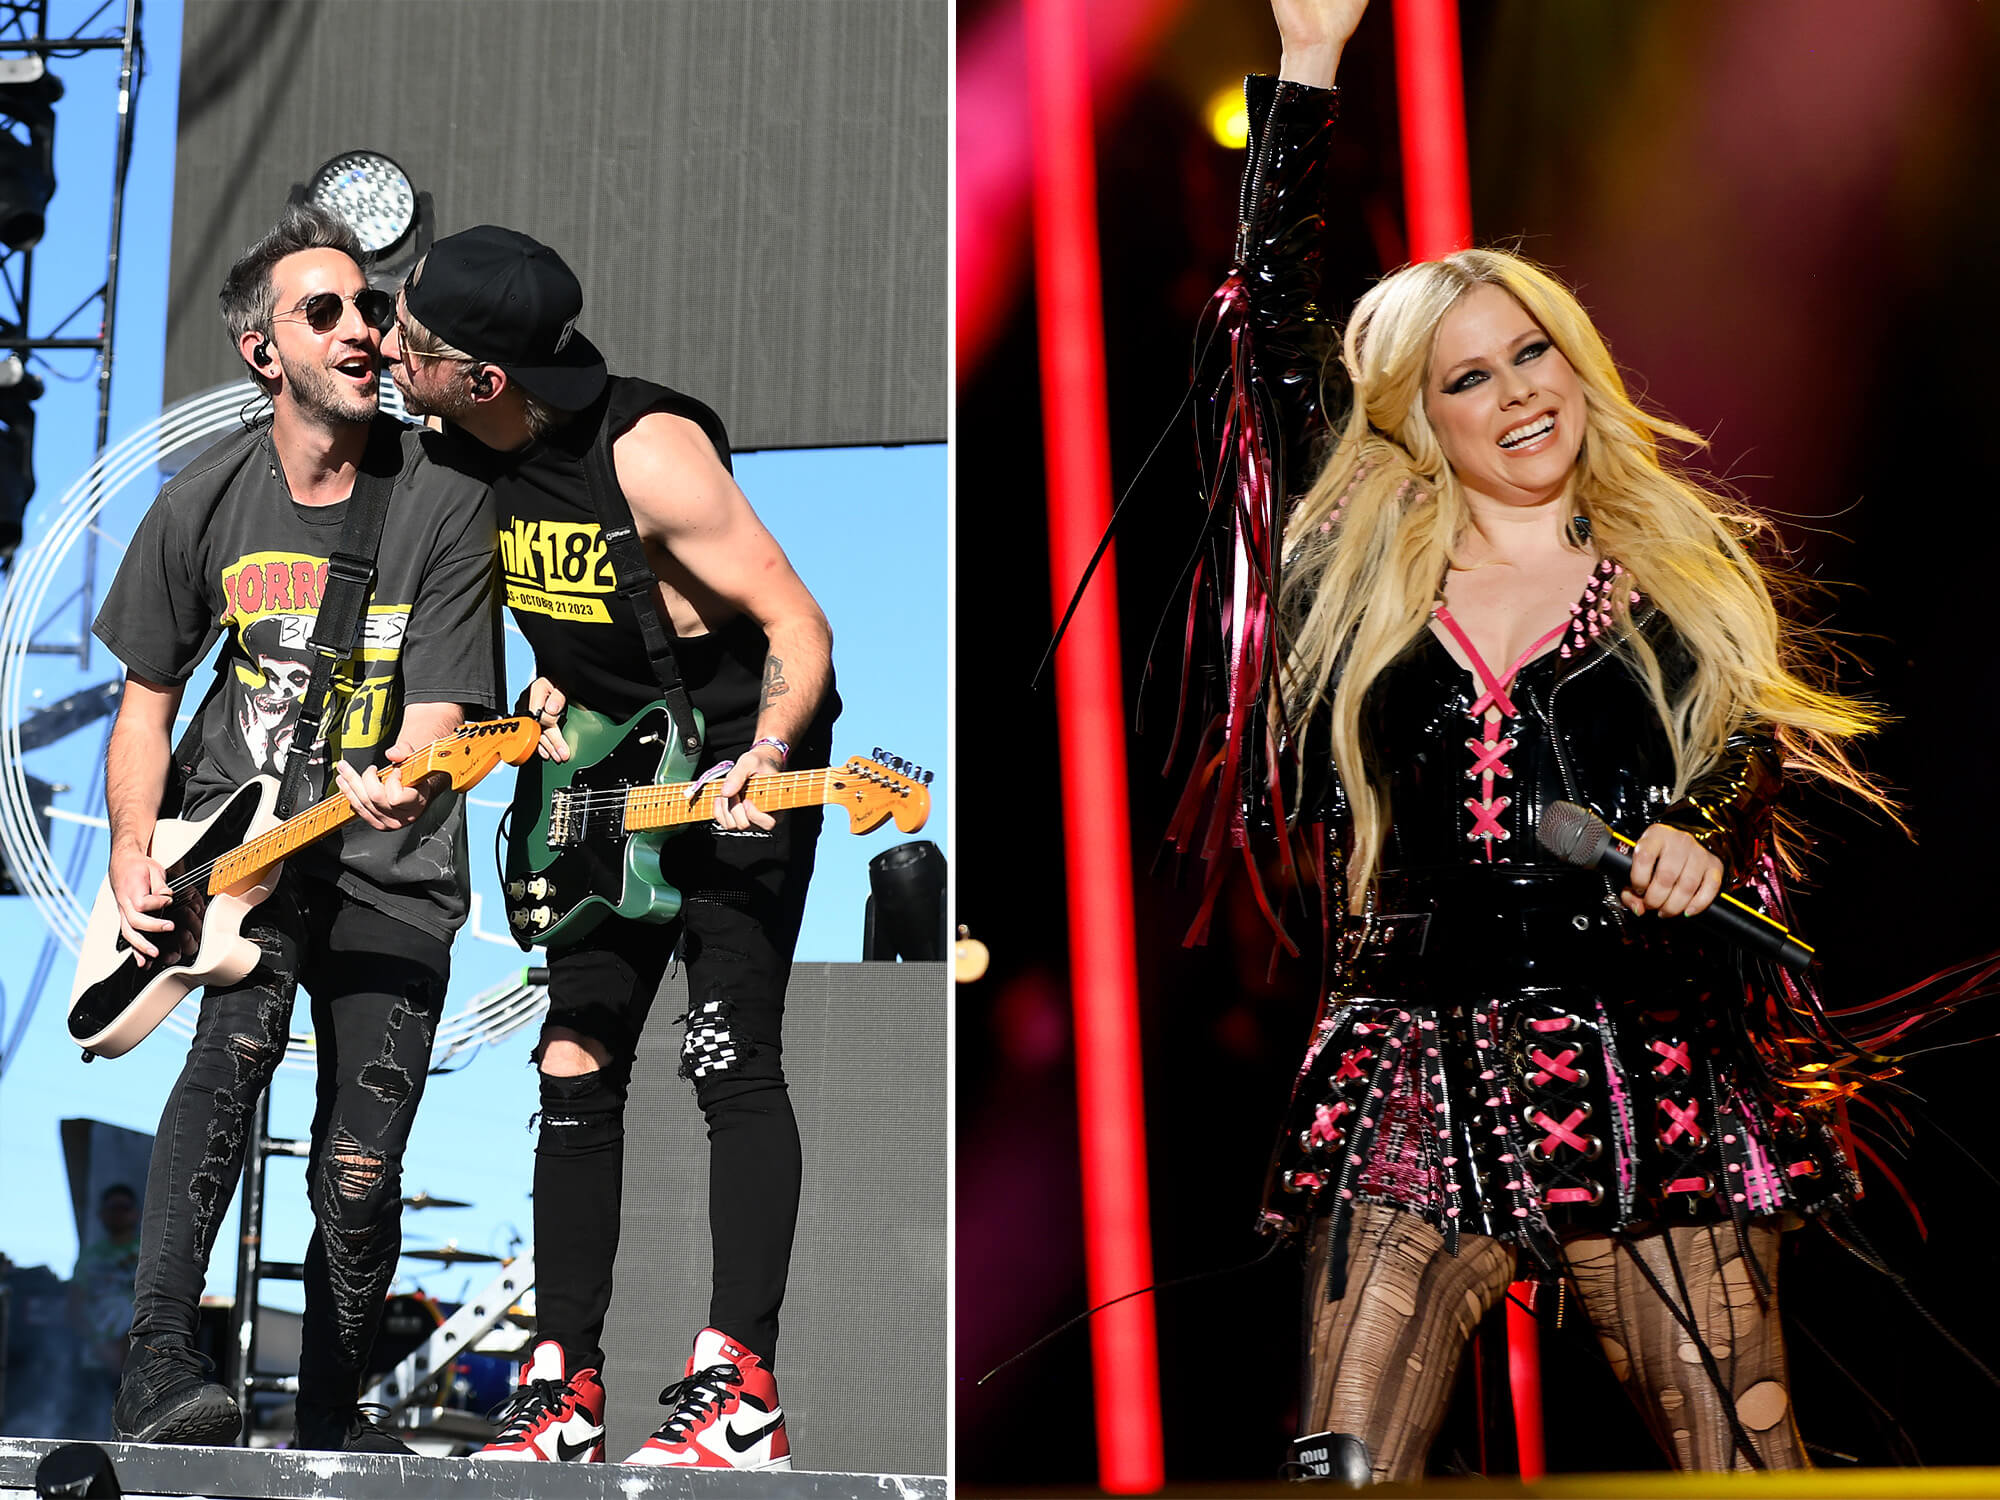 (Left) All Time Low's Alex Gaskarth leaning into fellow member Jack Barakat at WWWY Fest. They both hold guitars. (Right) Avril Lavigne on stage holding a mic in one hand, and her other hand is held in the air. She is smiling wide at the crowd.